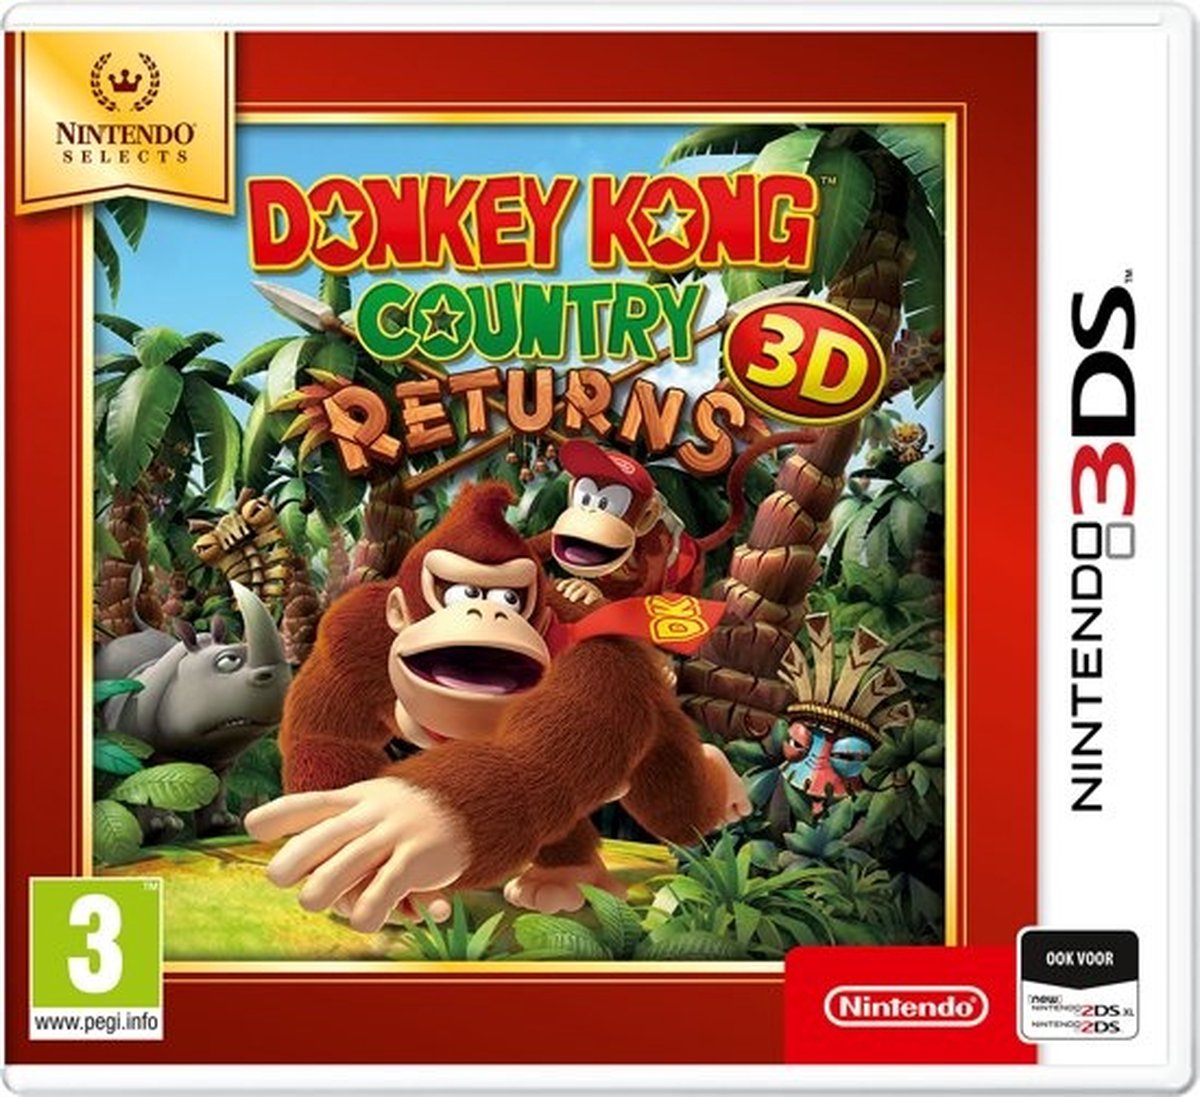 Donkey Kong Country Returns 3D /3DS - Nintendo